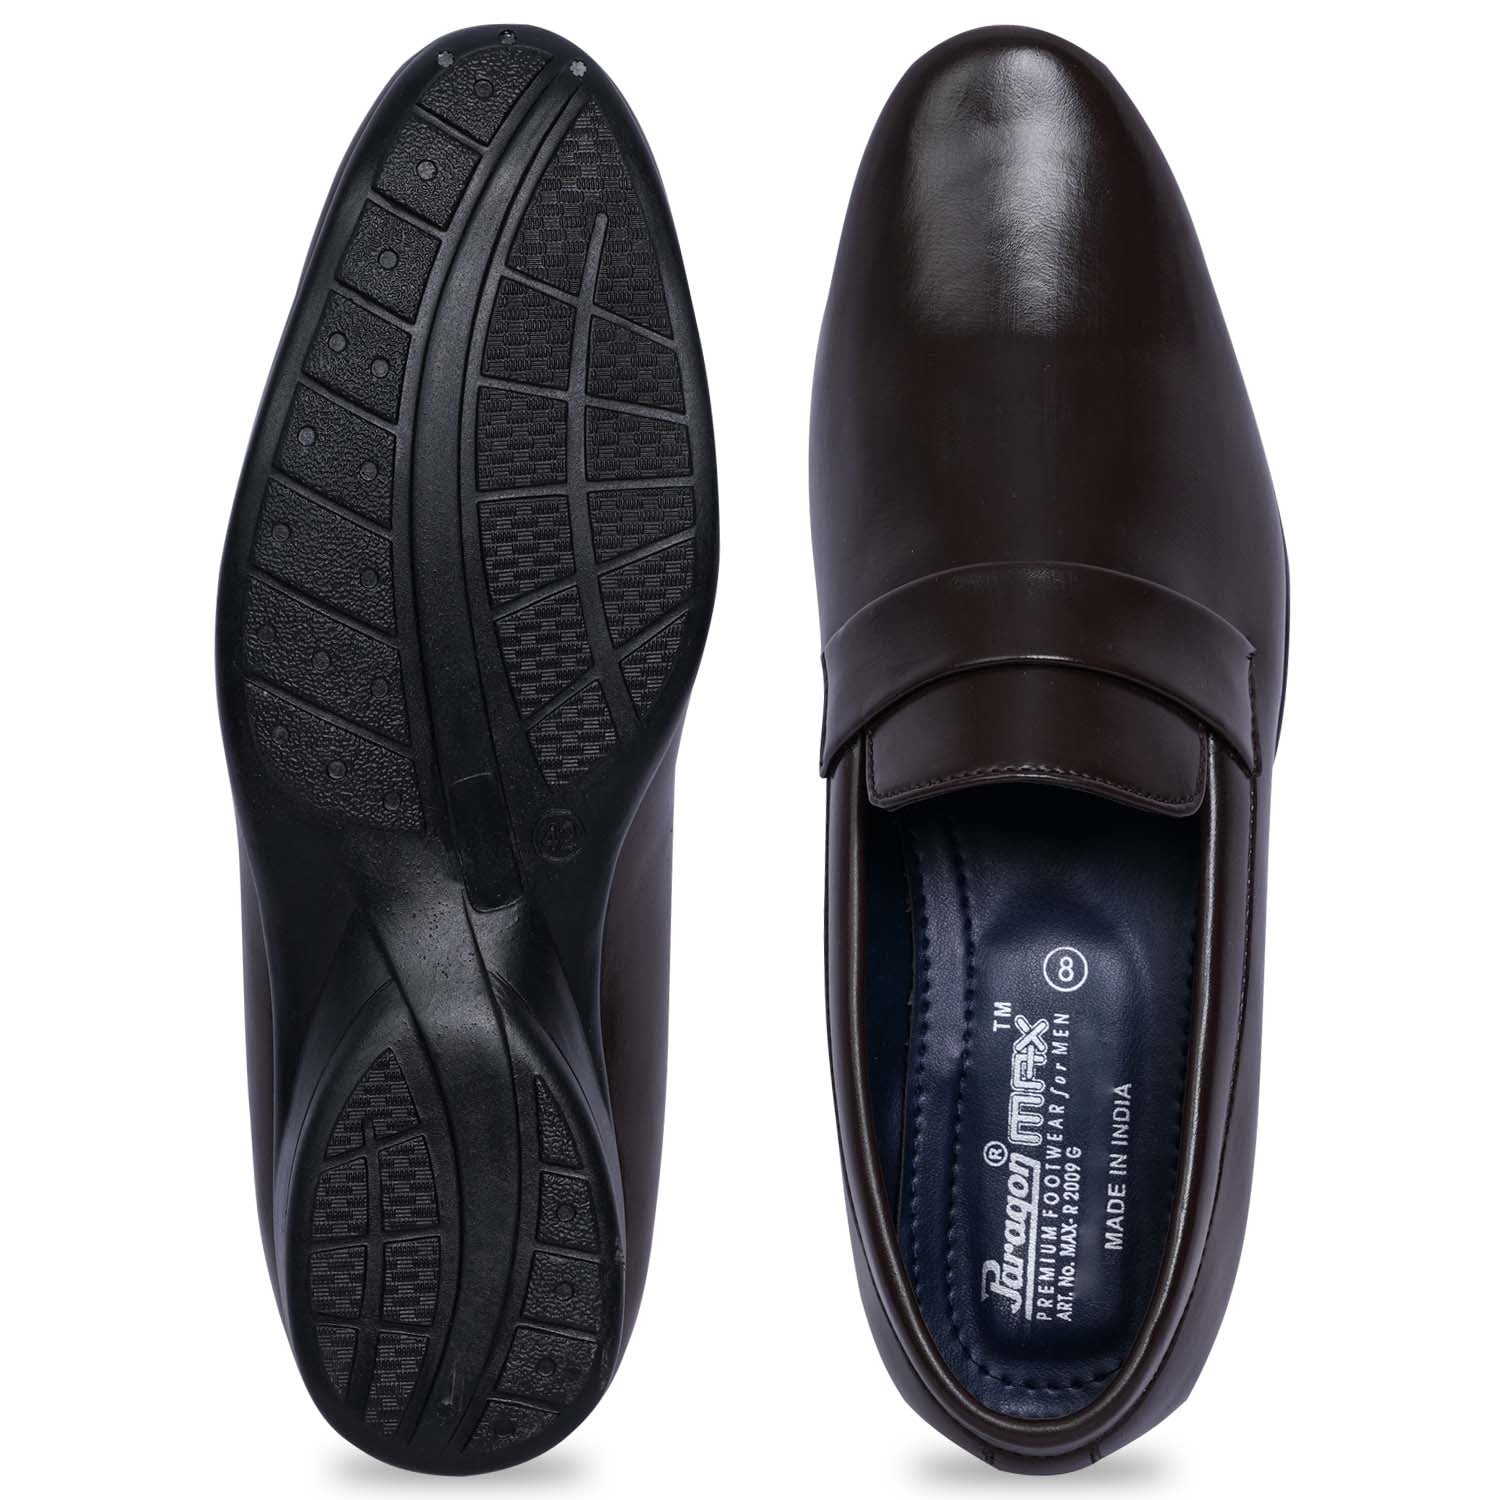 Paragon R2009G Men Formal Shoes | Corporate Office Shoes | Smart &amp; Sleek Design | Comfortable Sole with Cushioning | Daily &amp; Occasion Wear